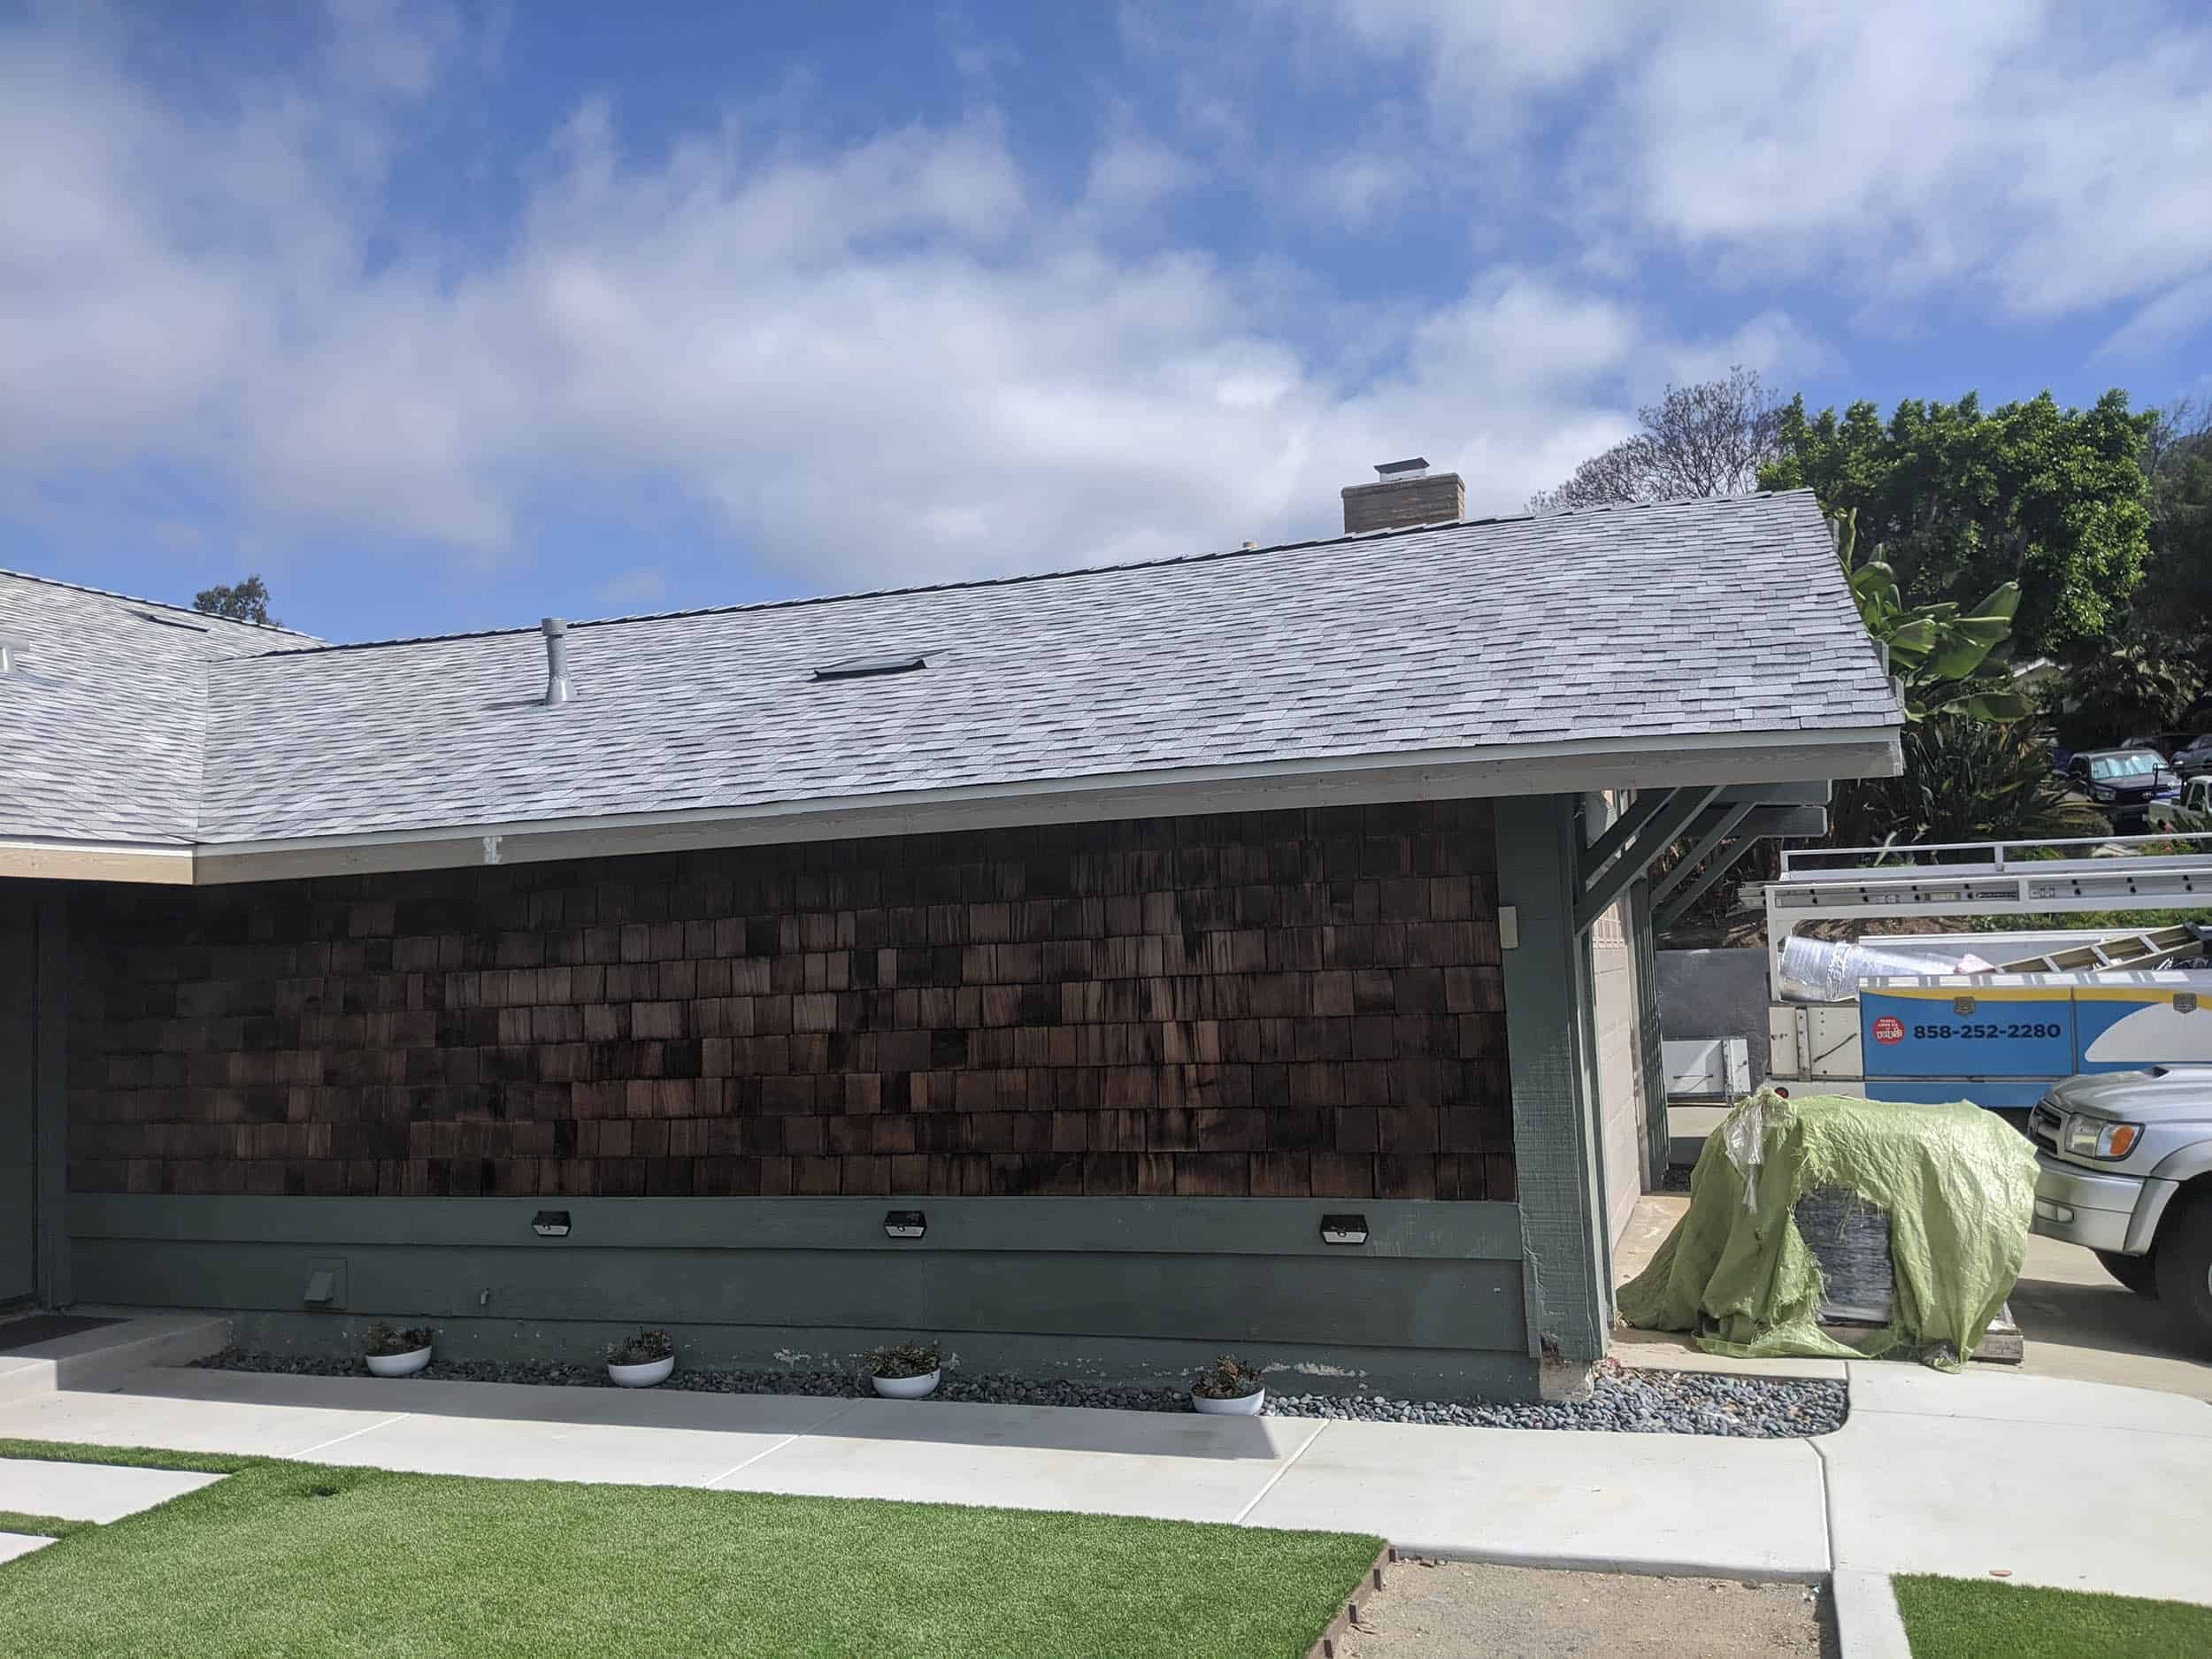 Best Roof Replacement Company in San Diego Shingle